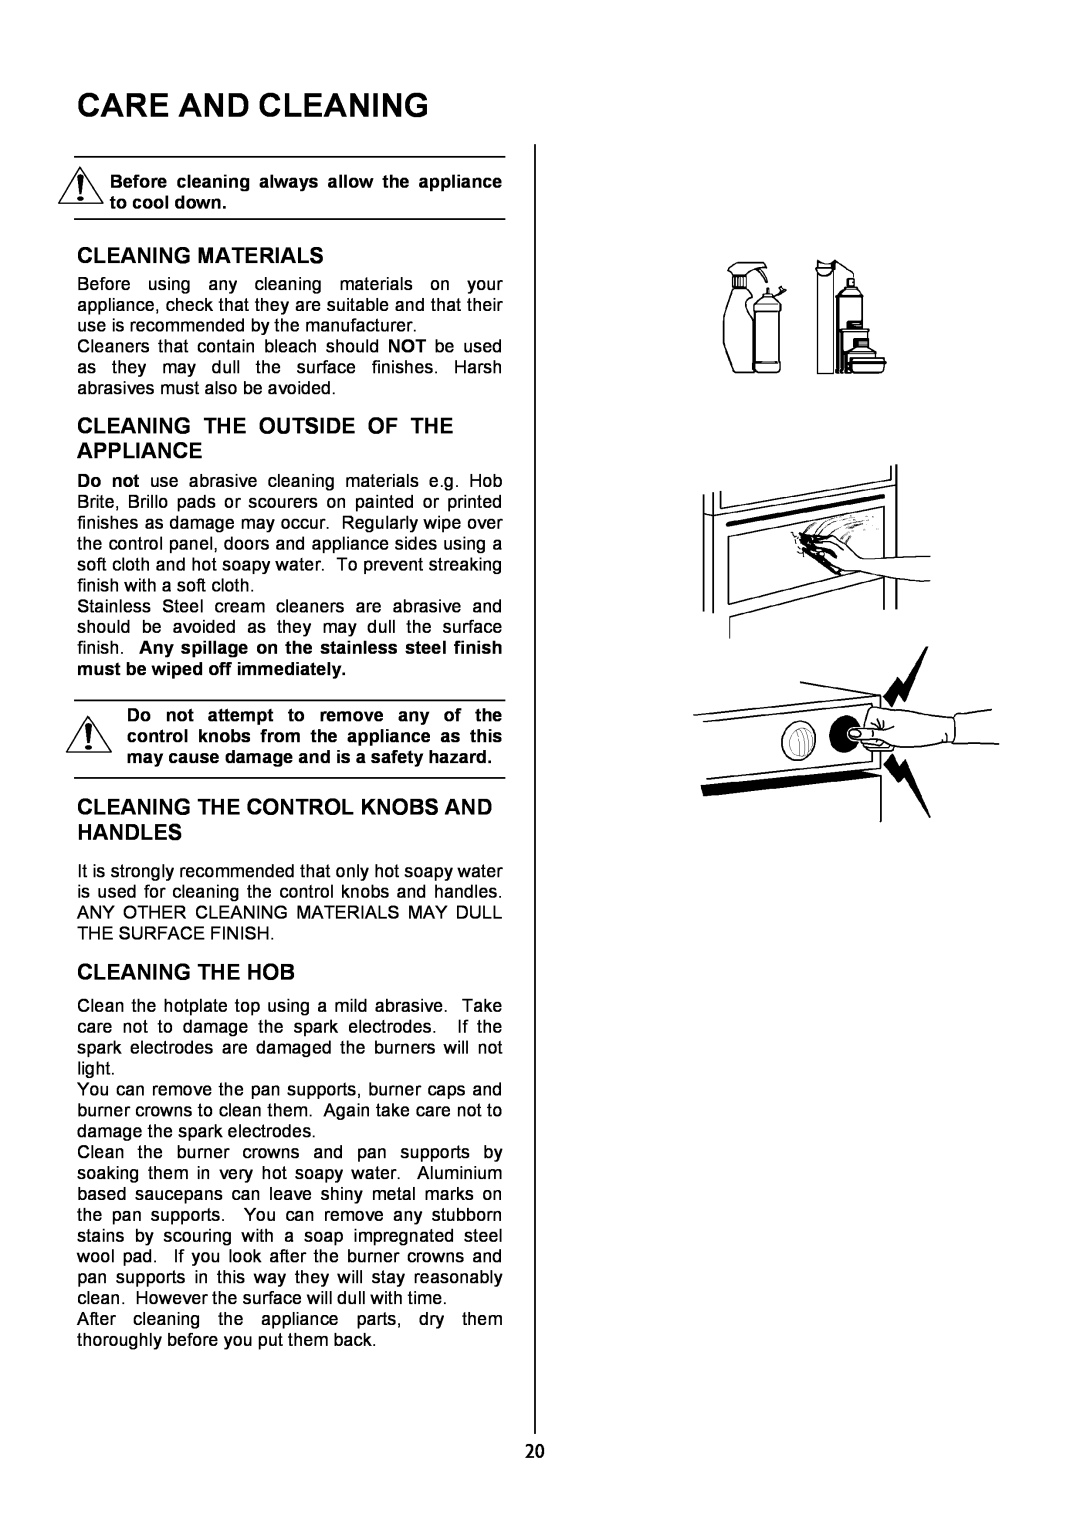 Electrolux EKG5047, EKG5046 Care And Cleaning, Cleaning Materials, Cleaning The Outside Of The Appliance, Cleaning The Hob 